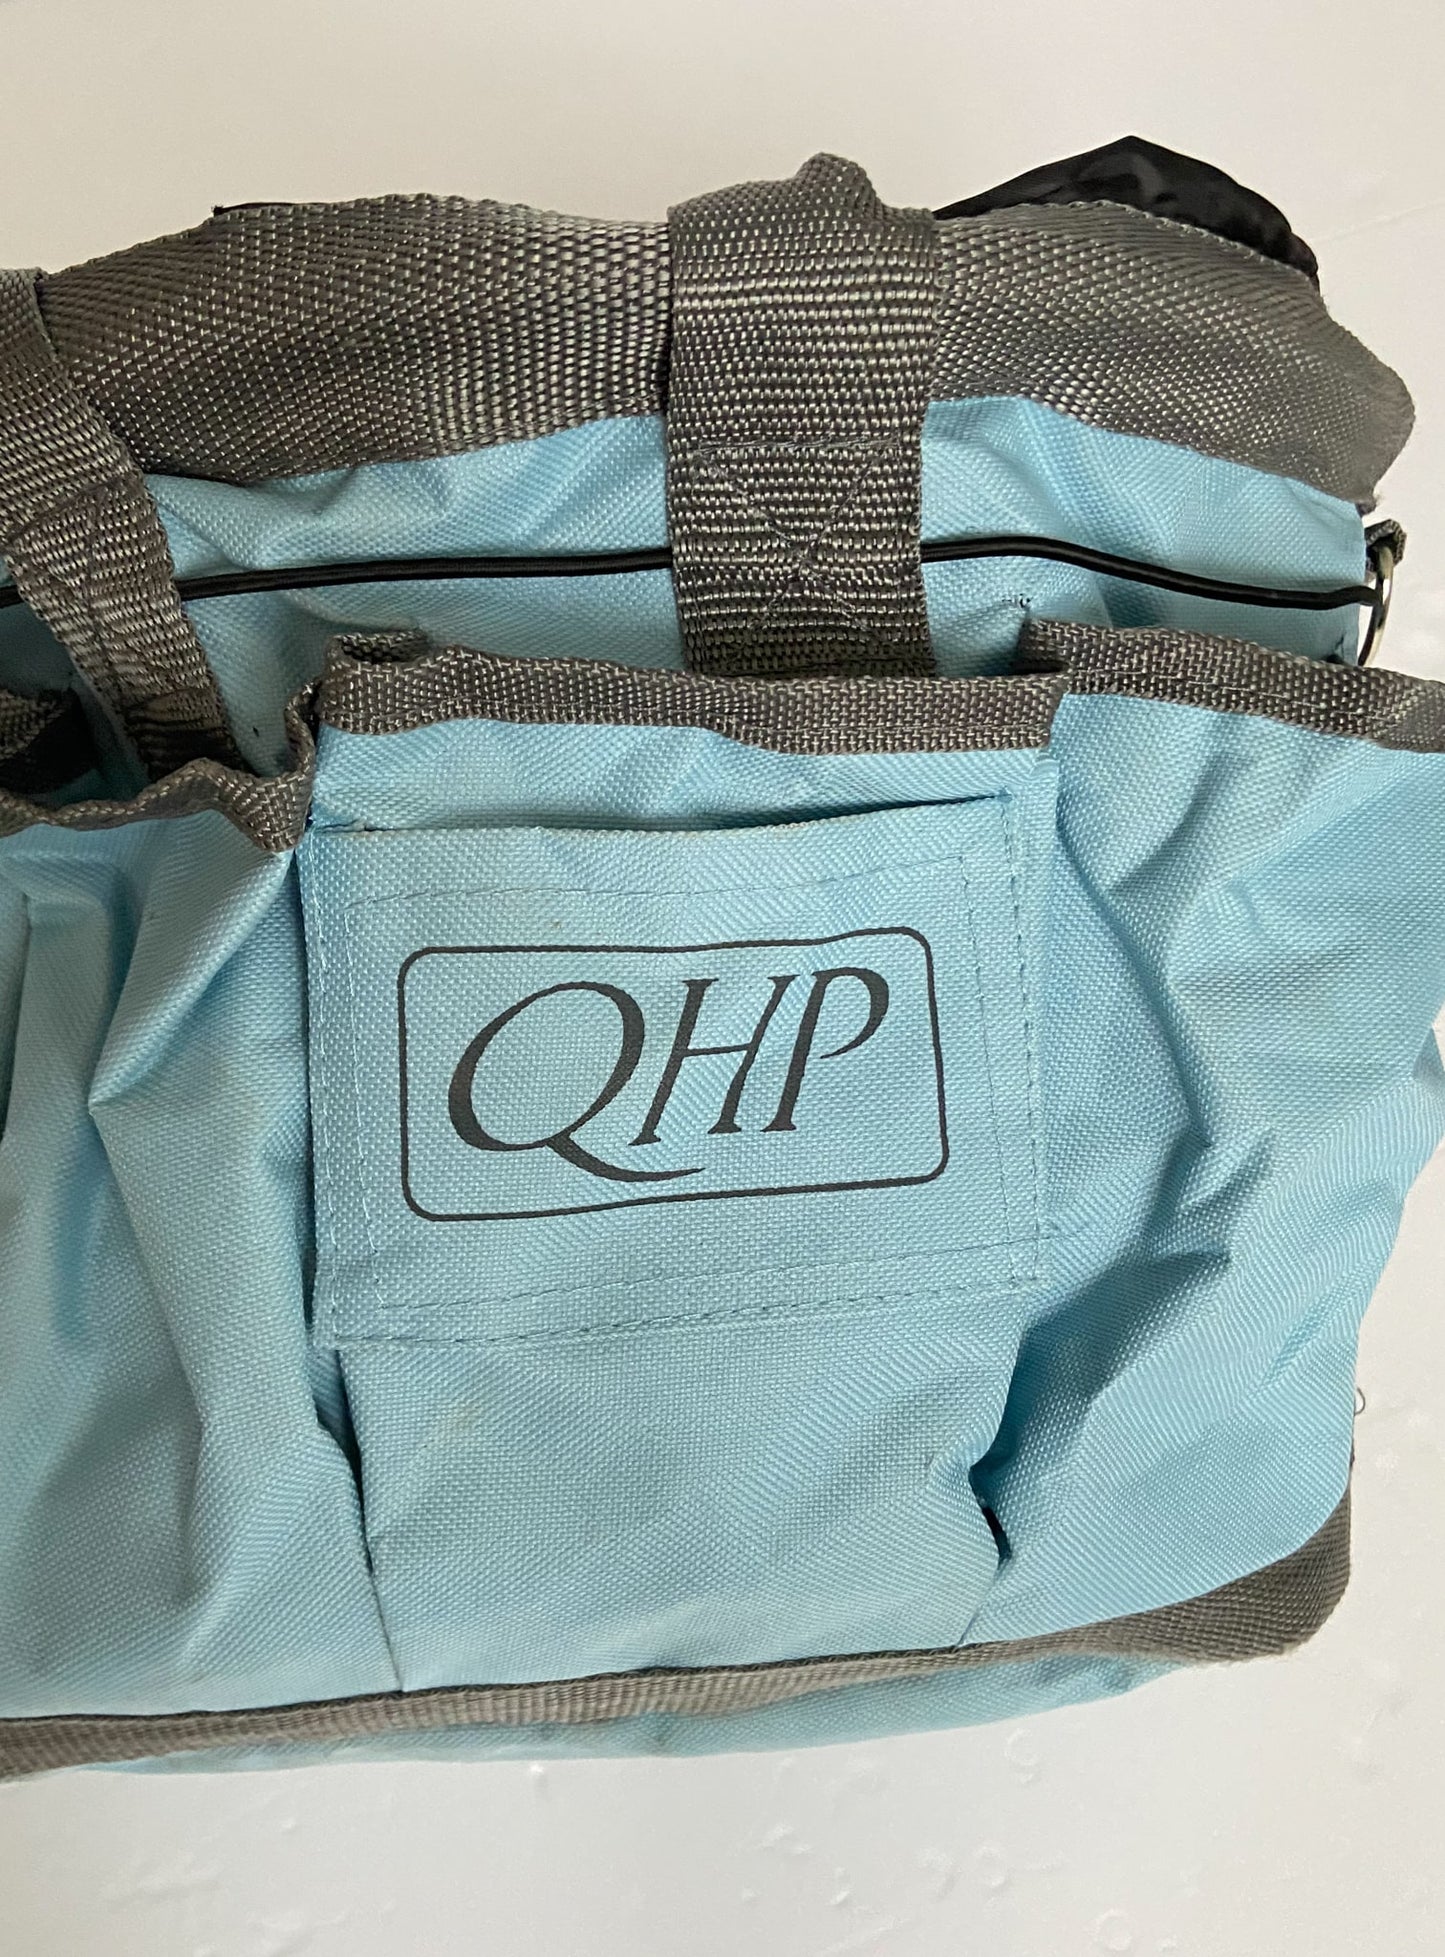 QHP Grooming Bag - Blue - One Size